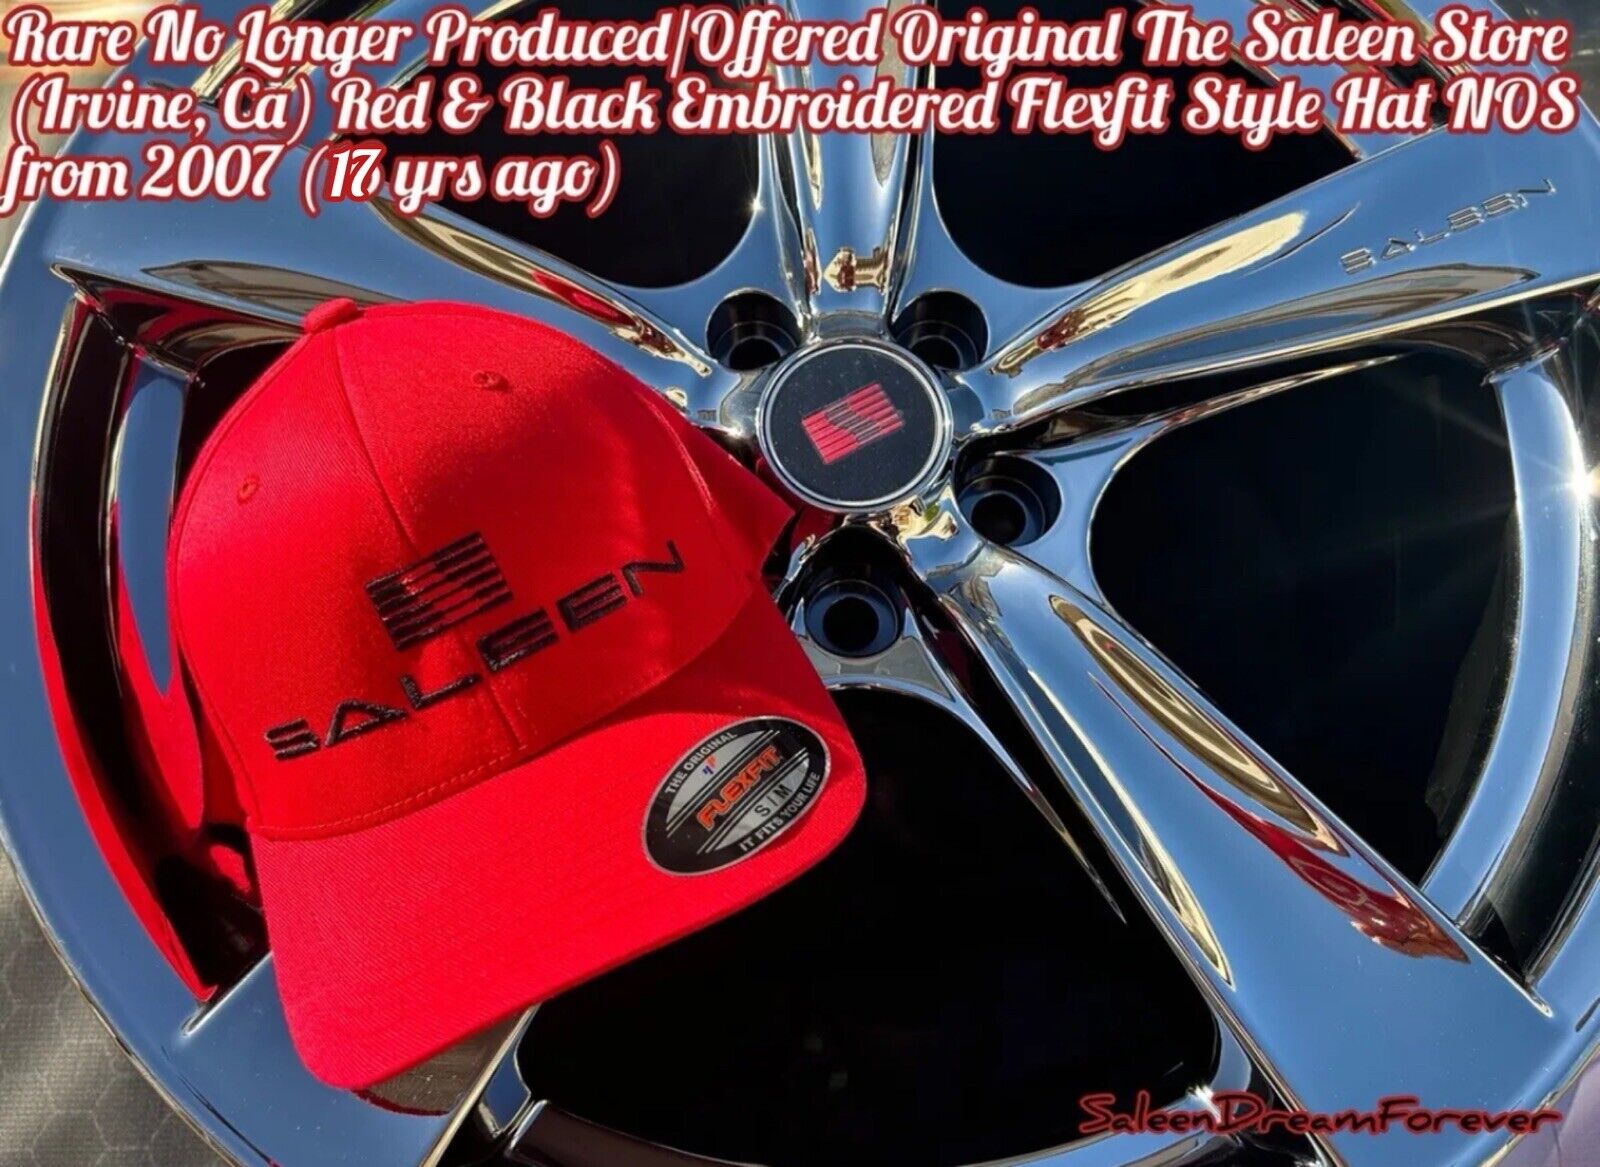 RARE THE SALEEN STORE RED BLK FLEXFIT HAT NOS S281 SC PJ MUSTANG S331 TRUCK FORD